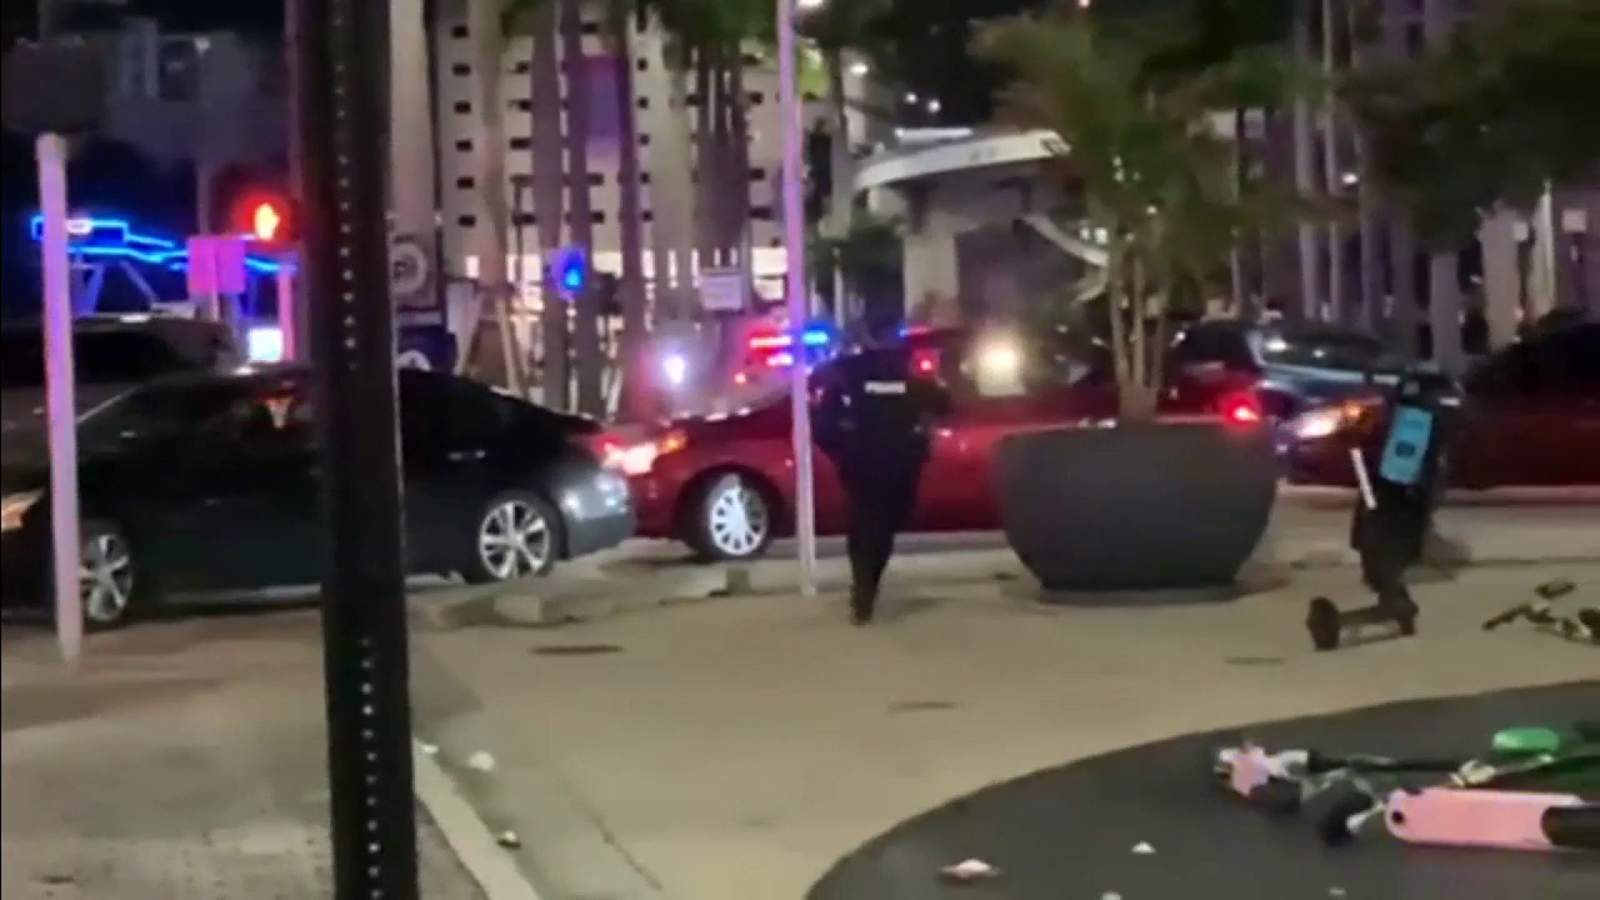 Chaotic scene near Miami’s Bayside on Biscayne after gunfire erupted